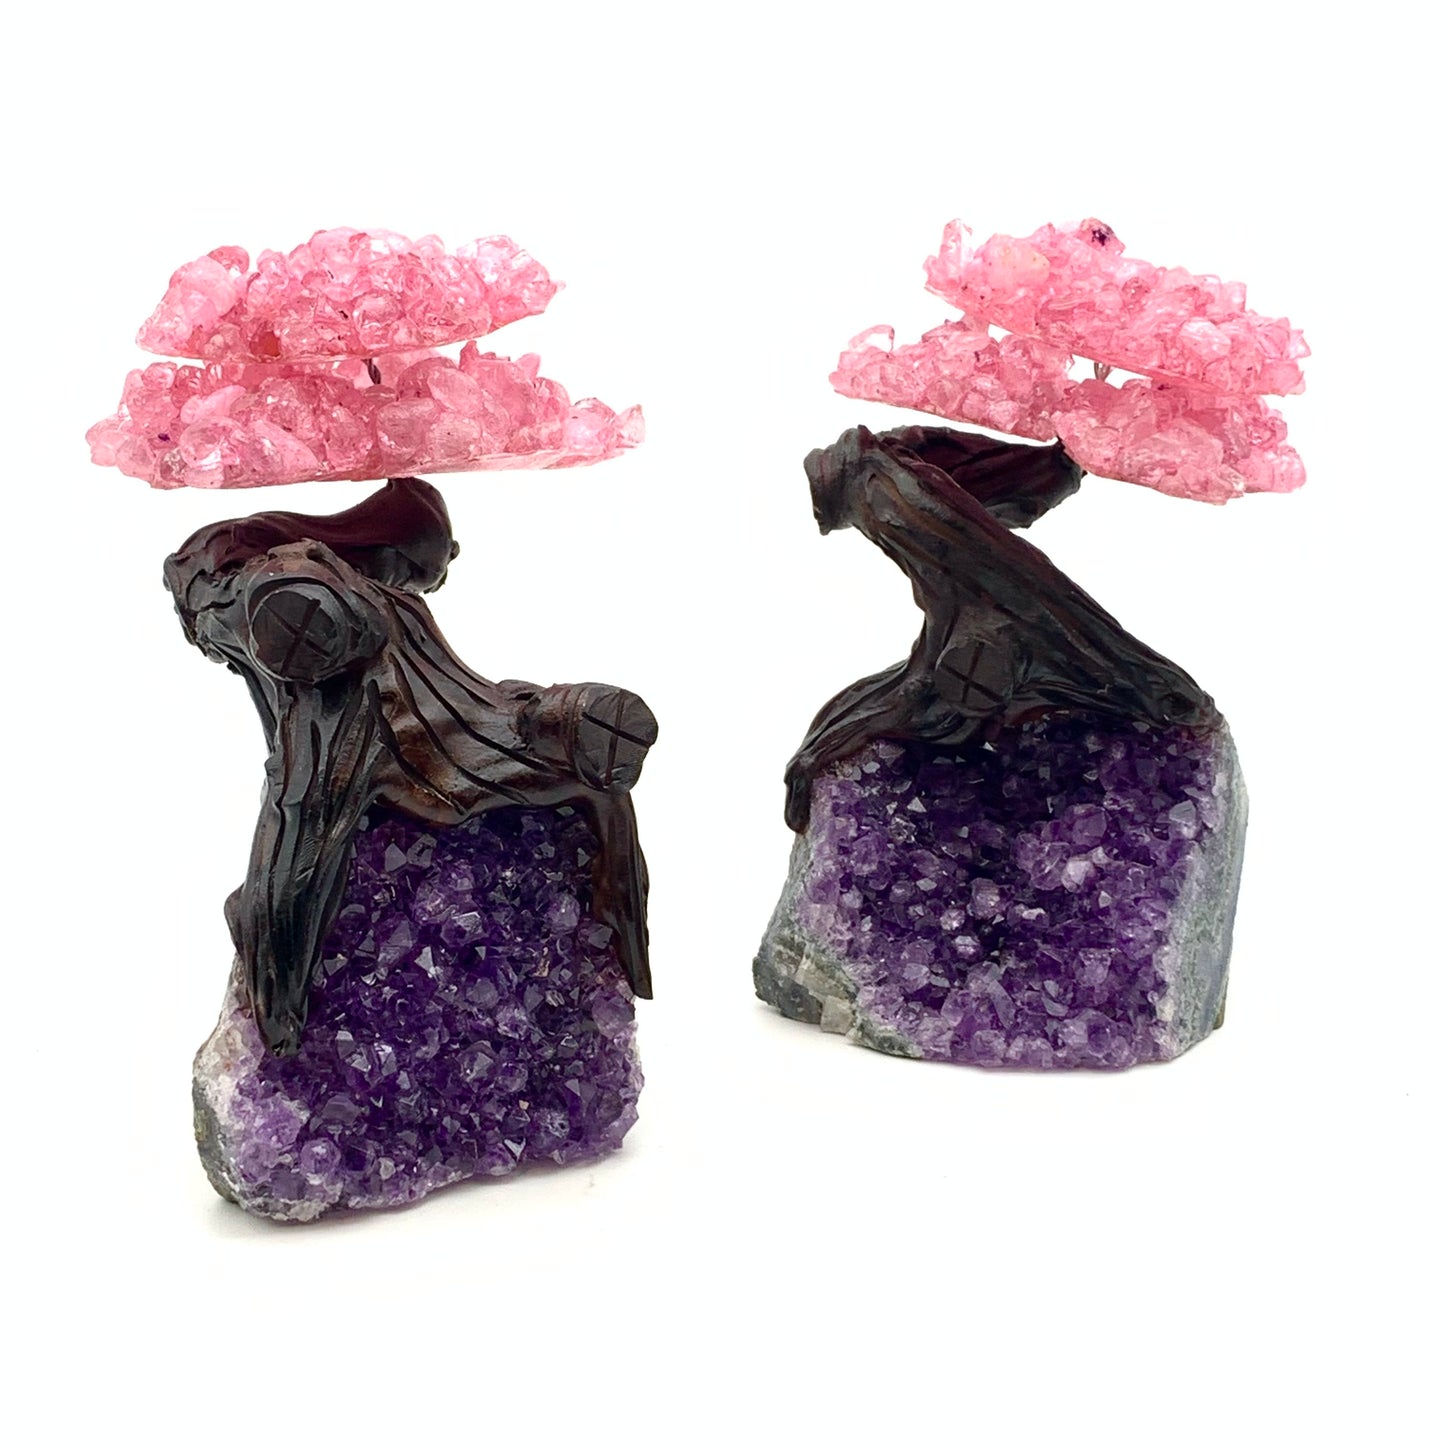 Handmade Natural Amethyst Cluster Tree - Available in 3 Sizes